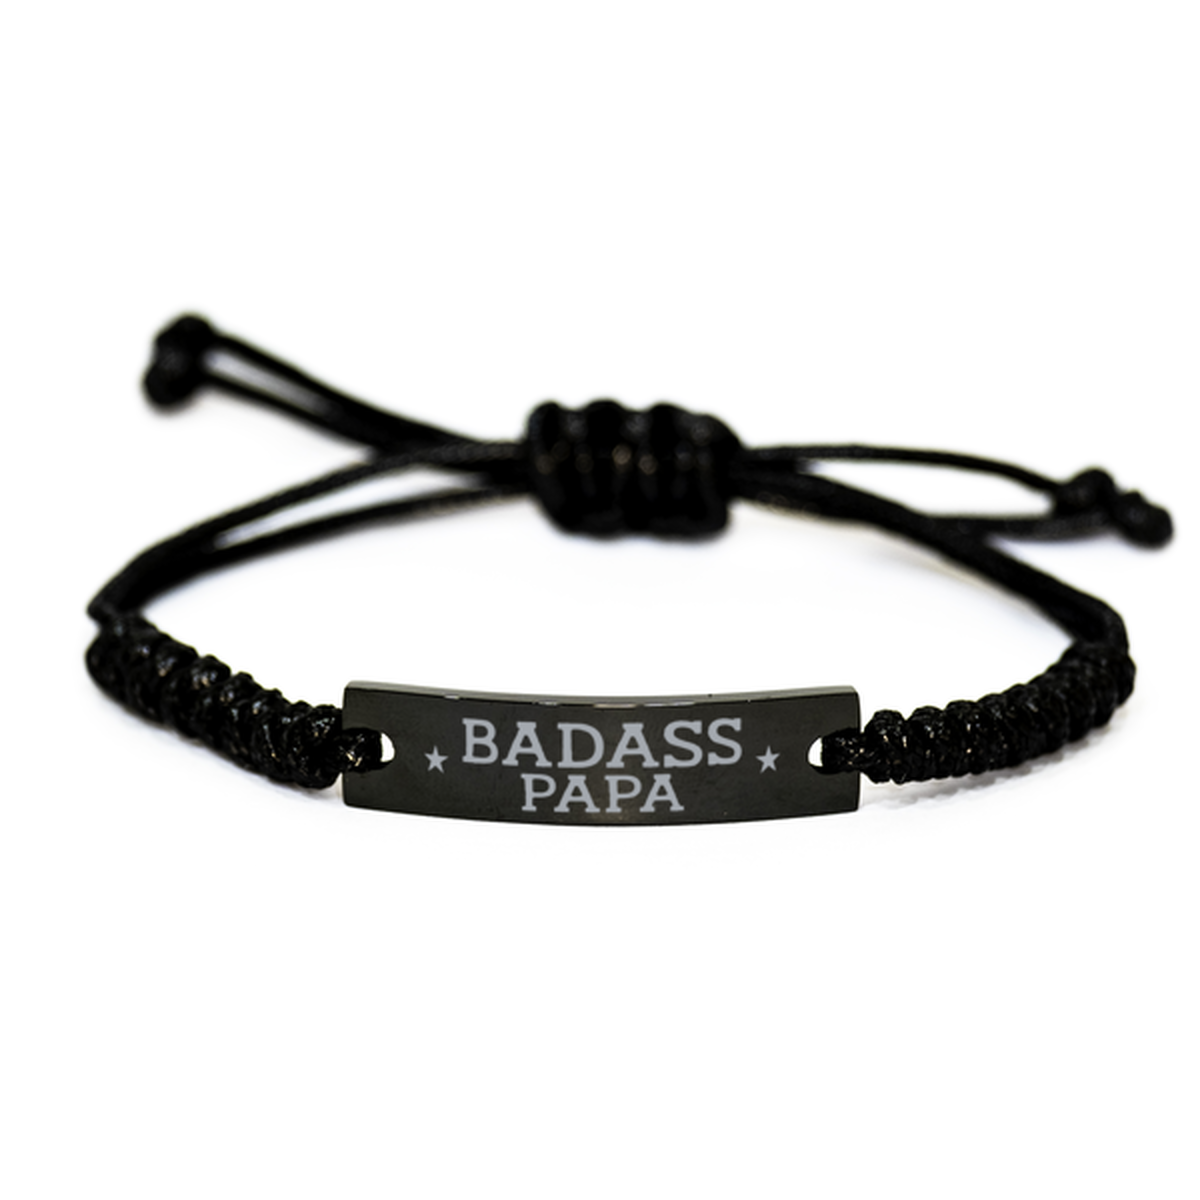 Papa Rope Bracelet, Badass Papa, Funny Family Gifts For Papa From Son Daughter